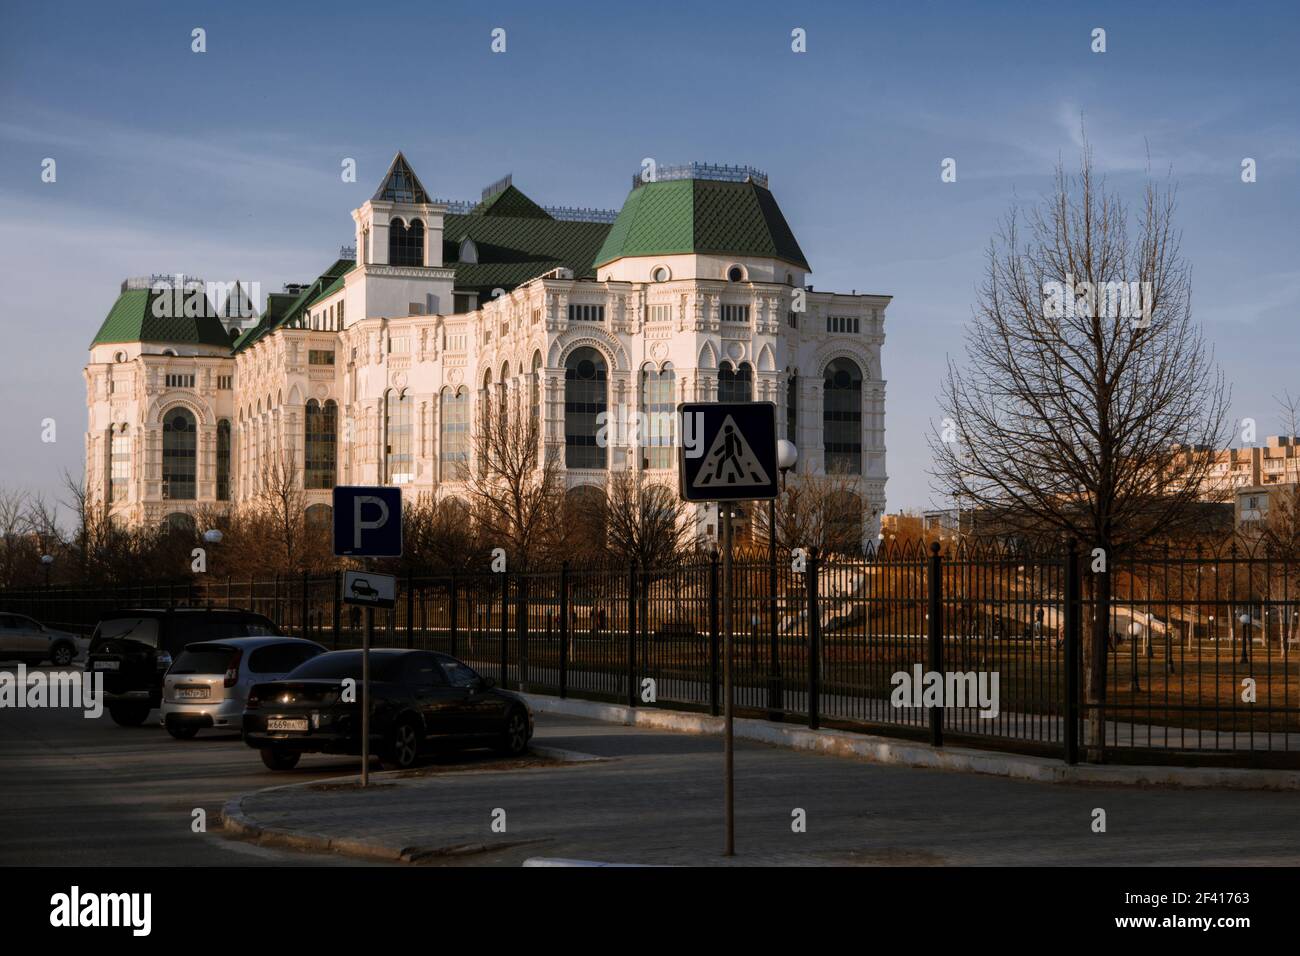 Astrakhan, Russia 12 of April 2018: New Astrakhan Opera Theater In Sunny Spring Day With Cars Parked About. Angle View.. Astrakhan, Russia 12 of April 2018: New Astrakhan Opera Theater In Sunny Spring Day With Cars Parked About. Stock Photo